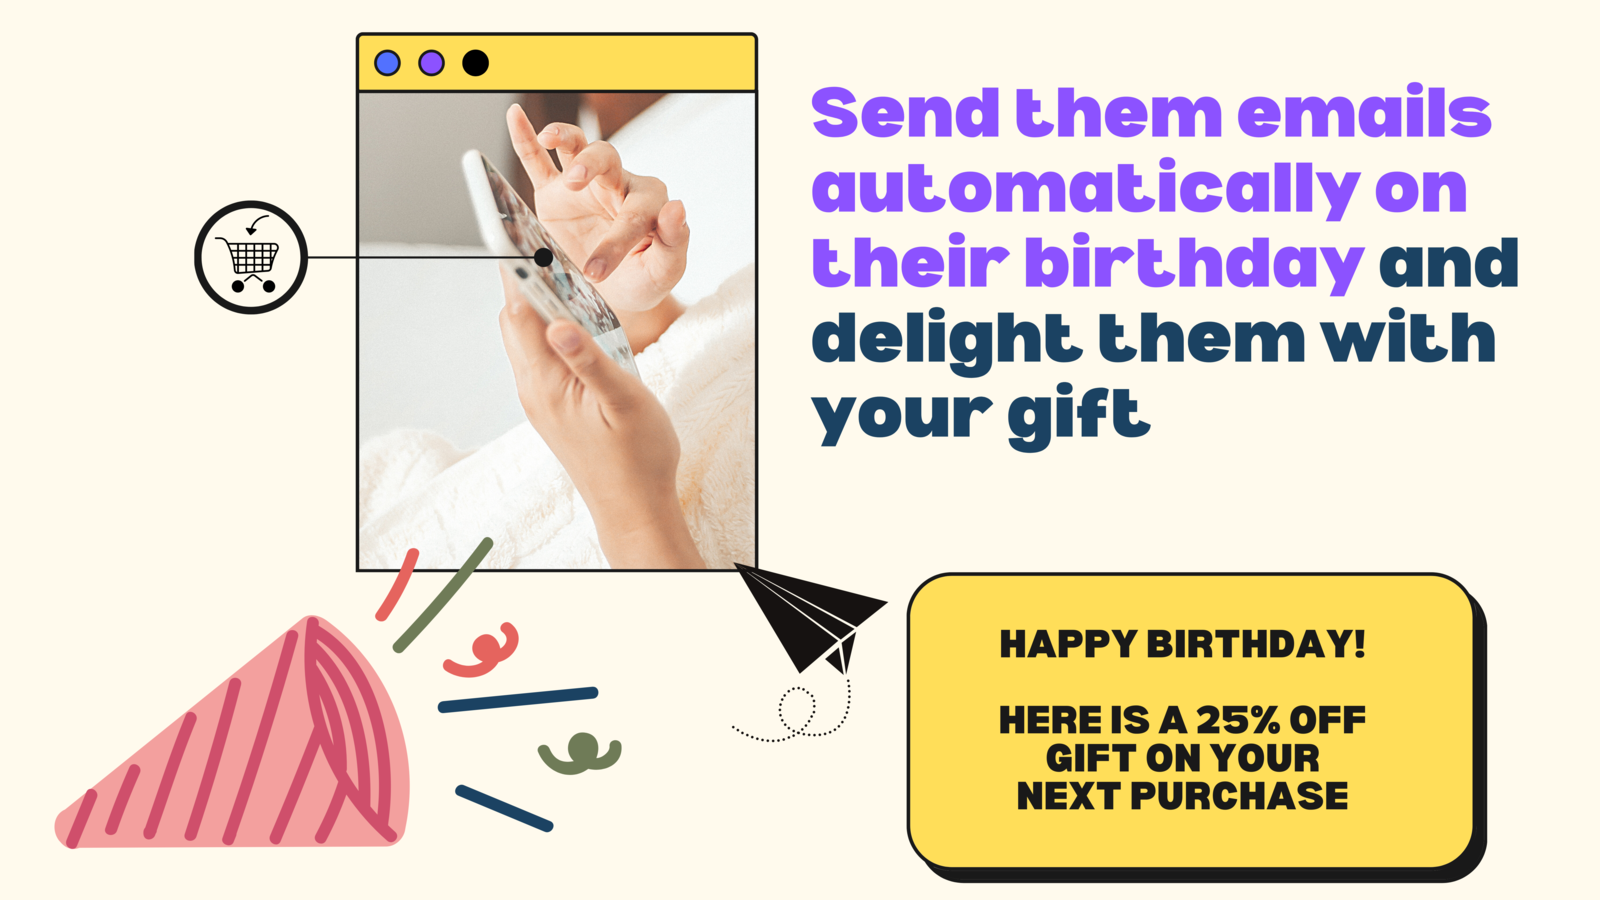 Send them special personalized offers on their birthday